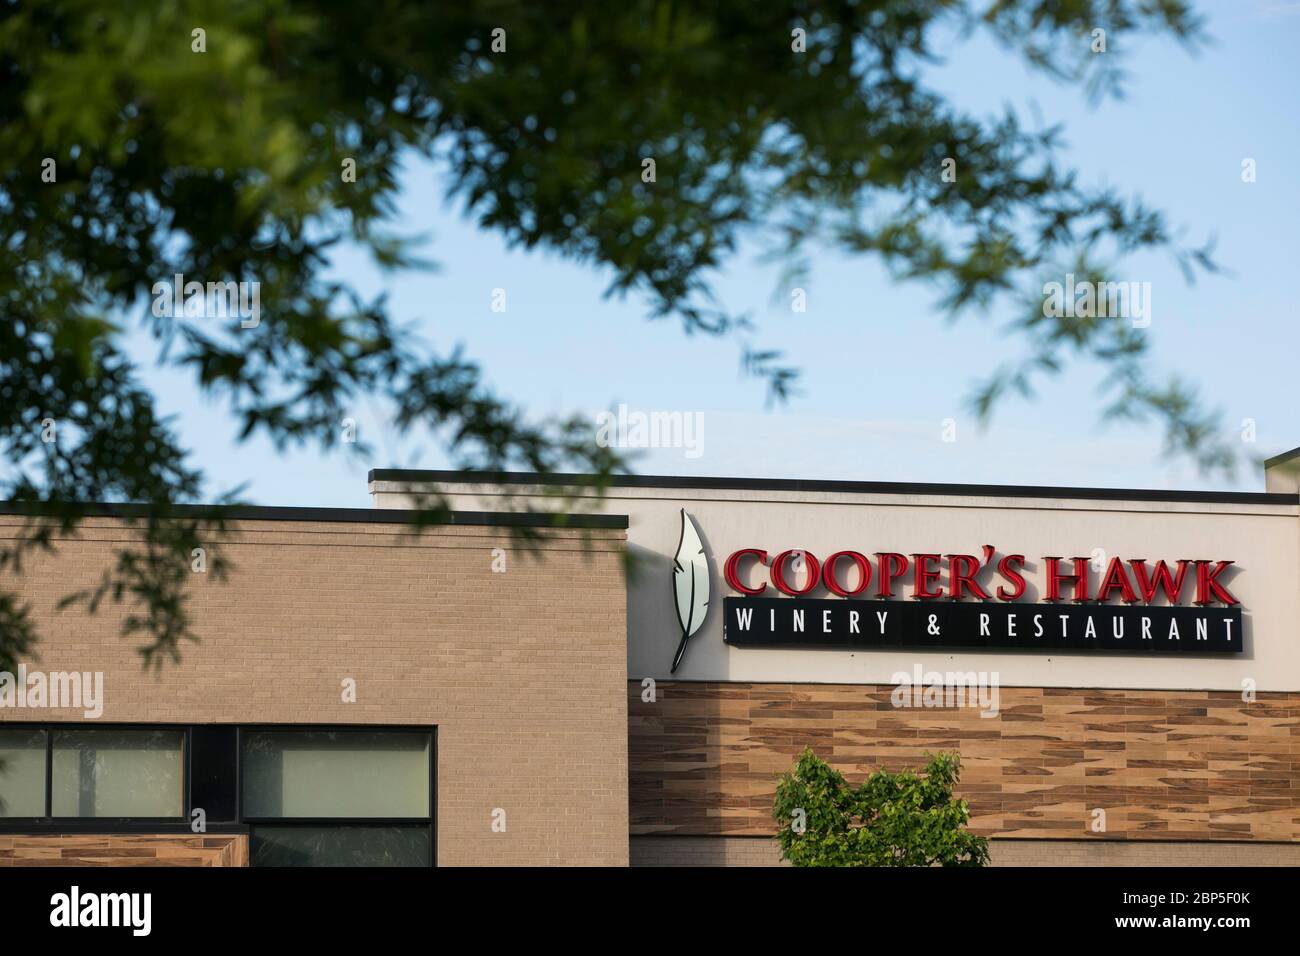 A logo sign outside of a Cooper's Hawk Winery & Restaurant location in Richmond, Virginia on May 13, 2020. Stock Photo